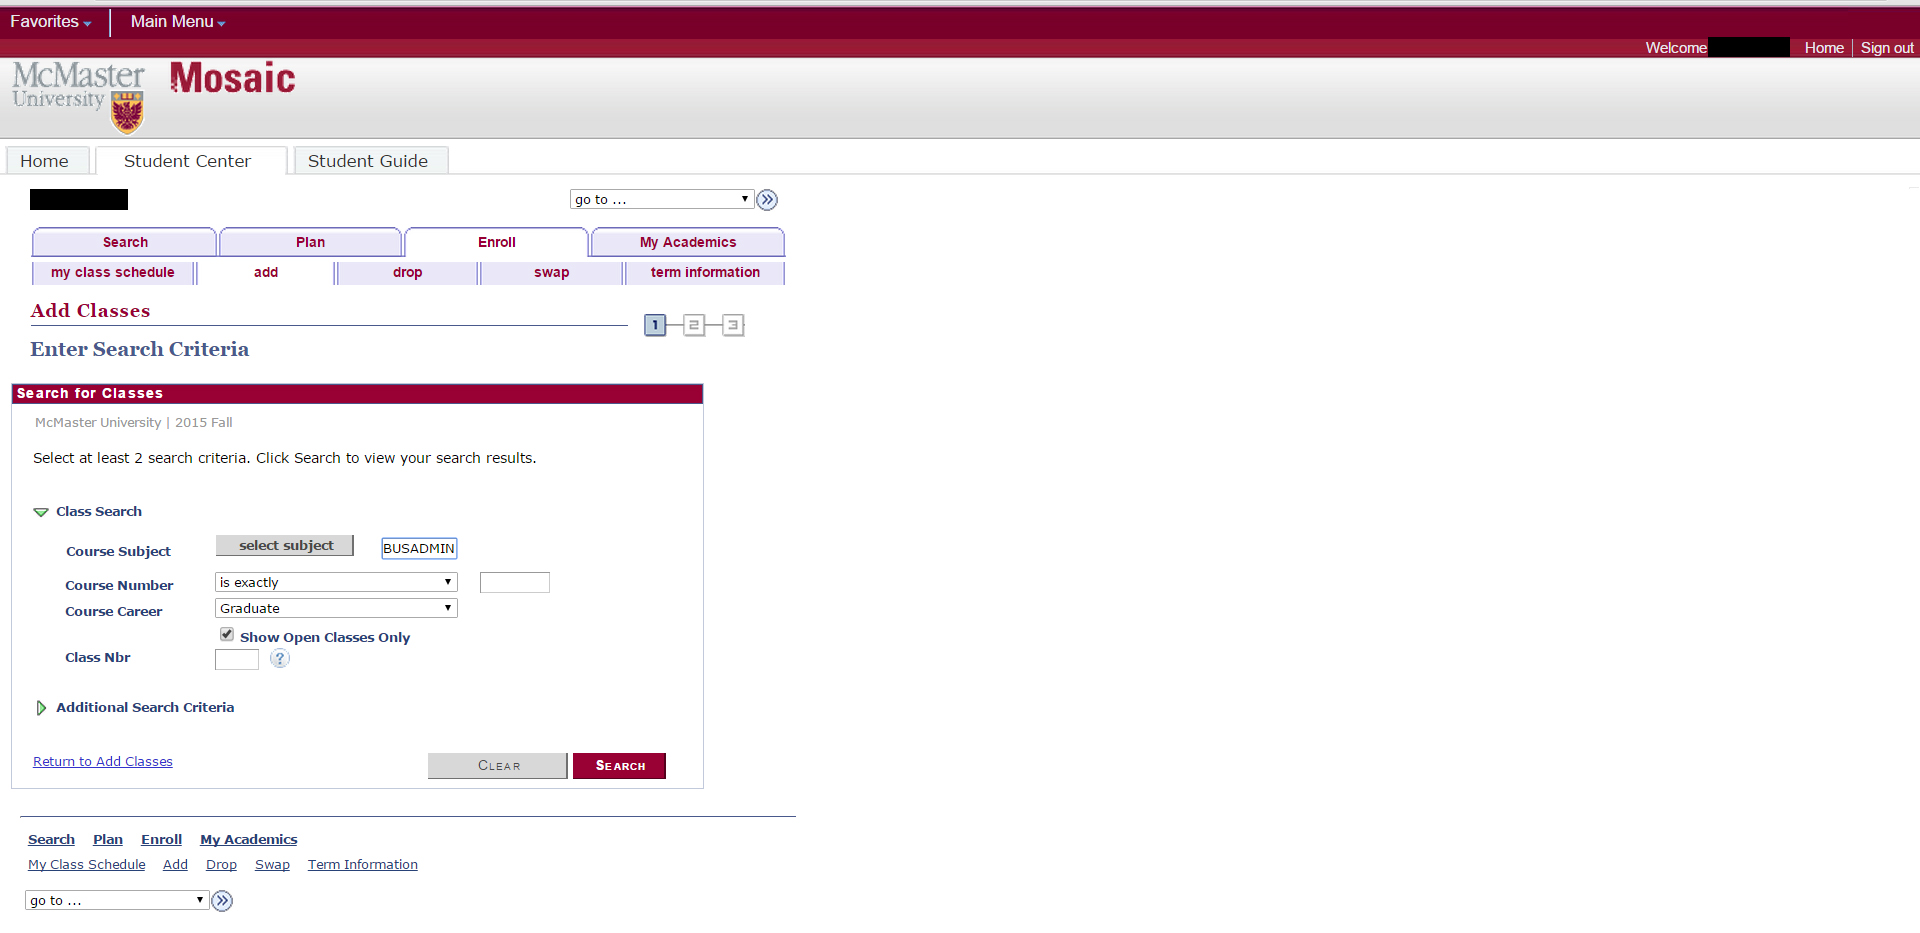 Screenshot of the "add classes" page. Shows the "enter search criteria" form.